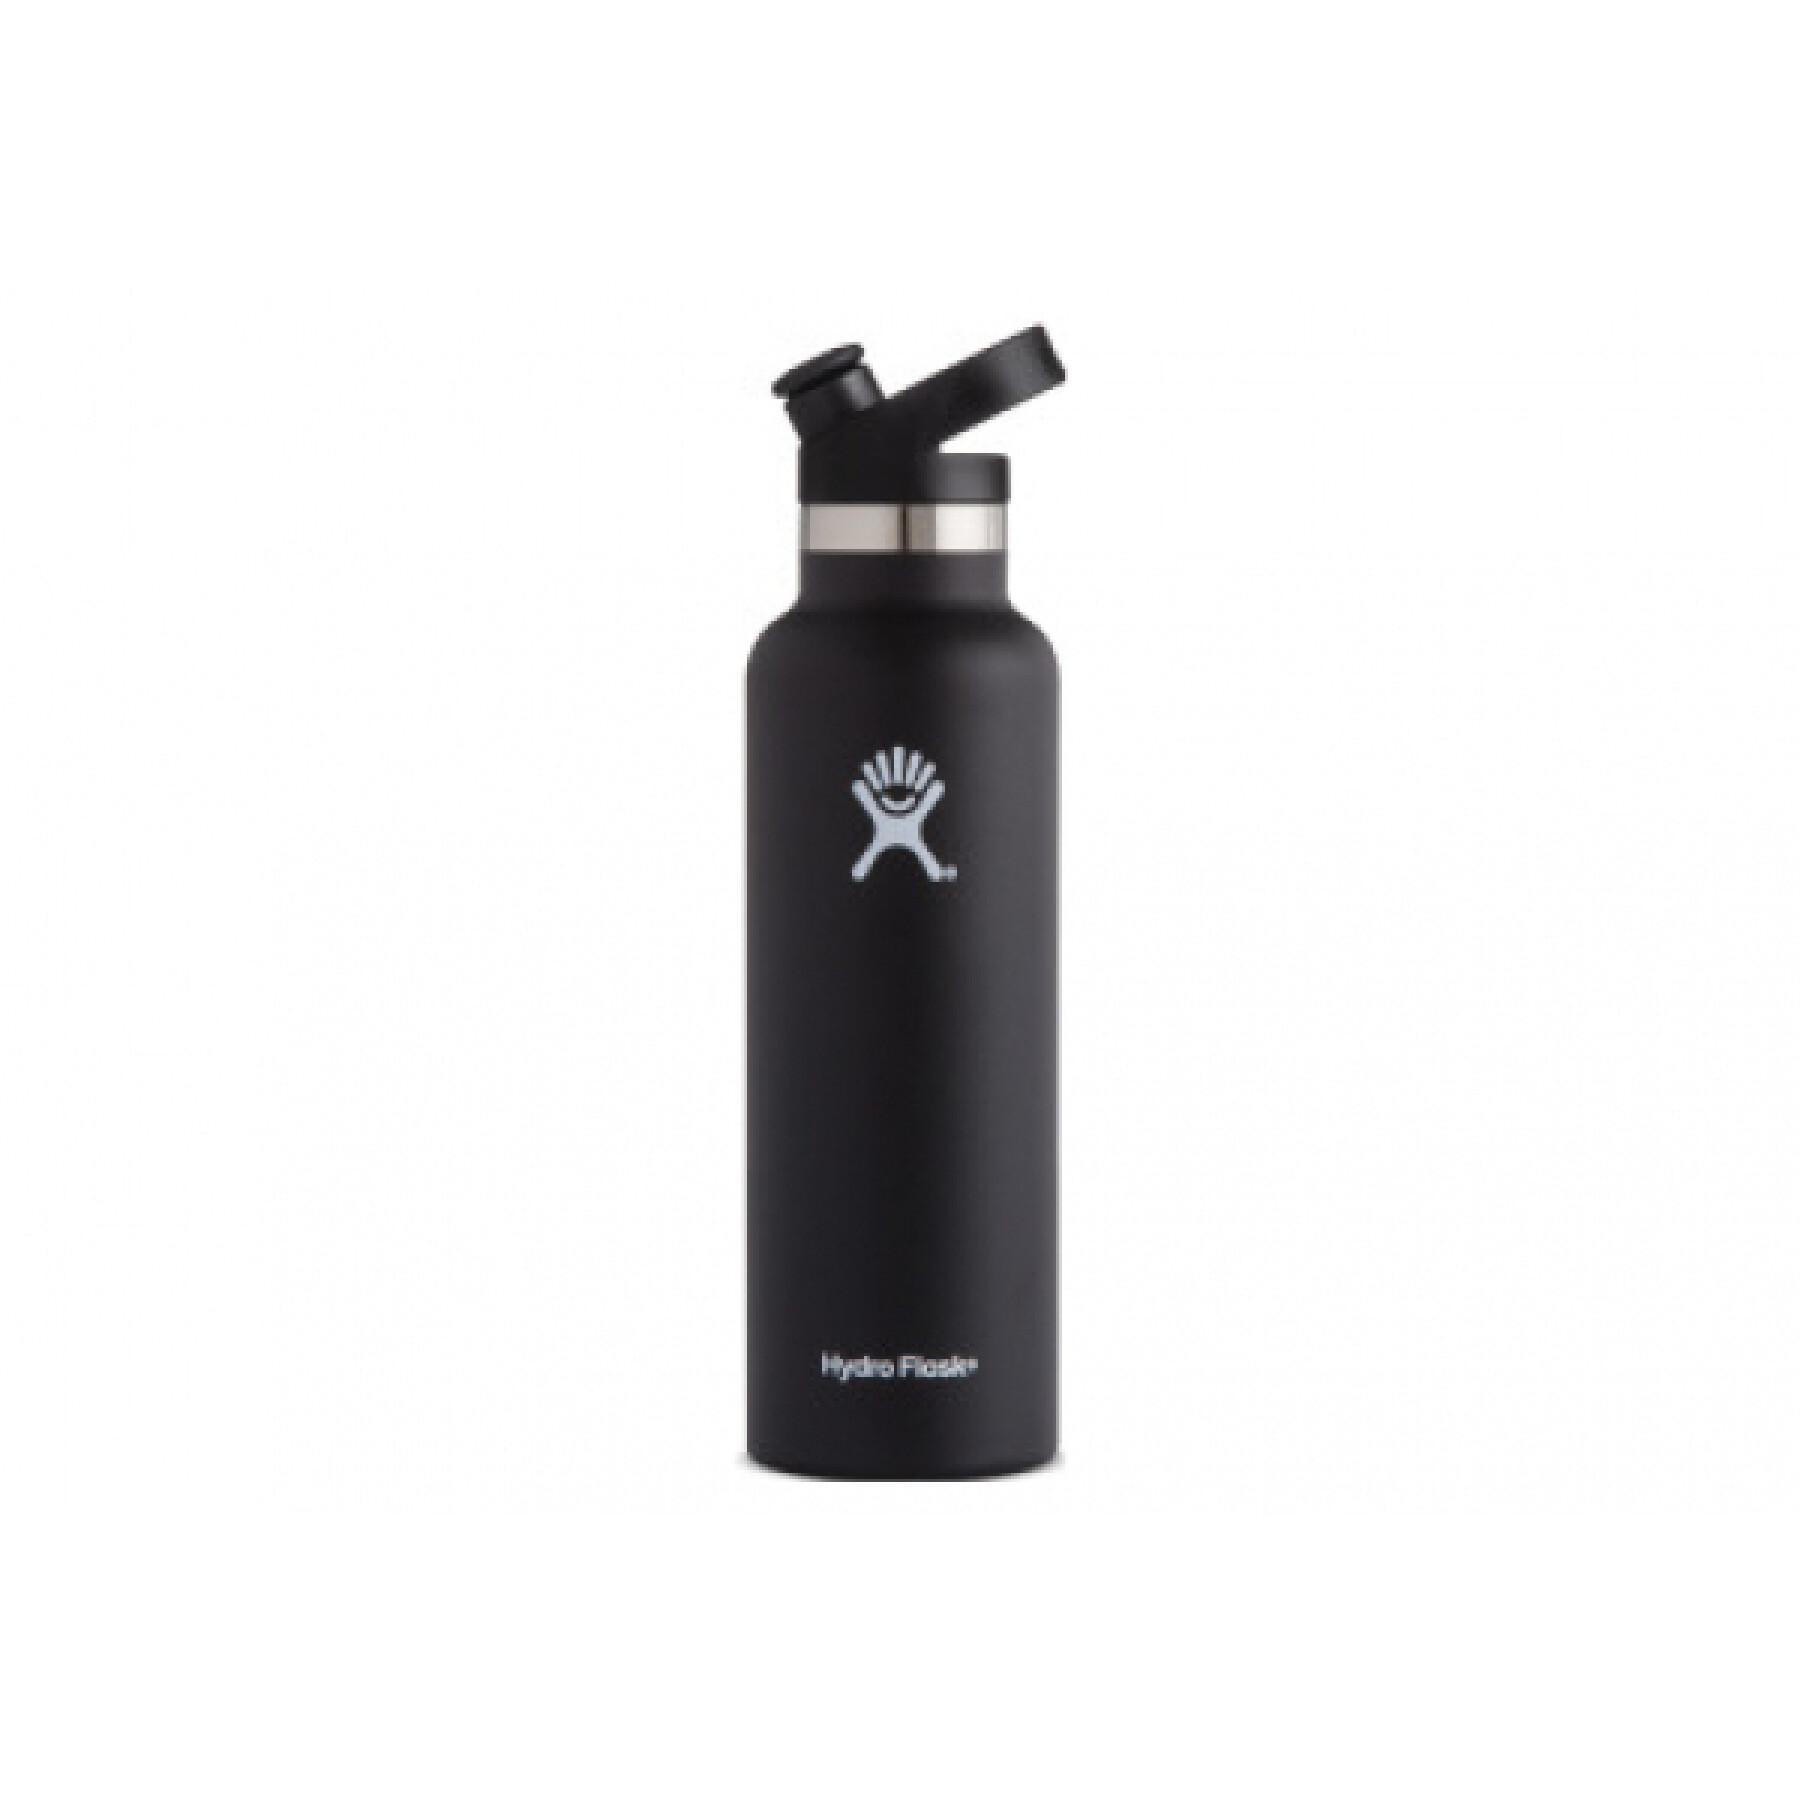 Standardflaska Hydro Flask mouth with sport cap 21 oz